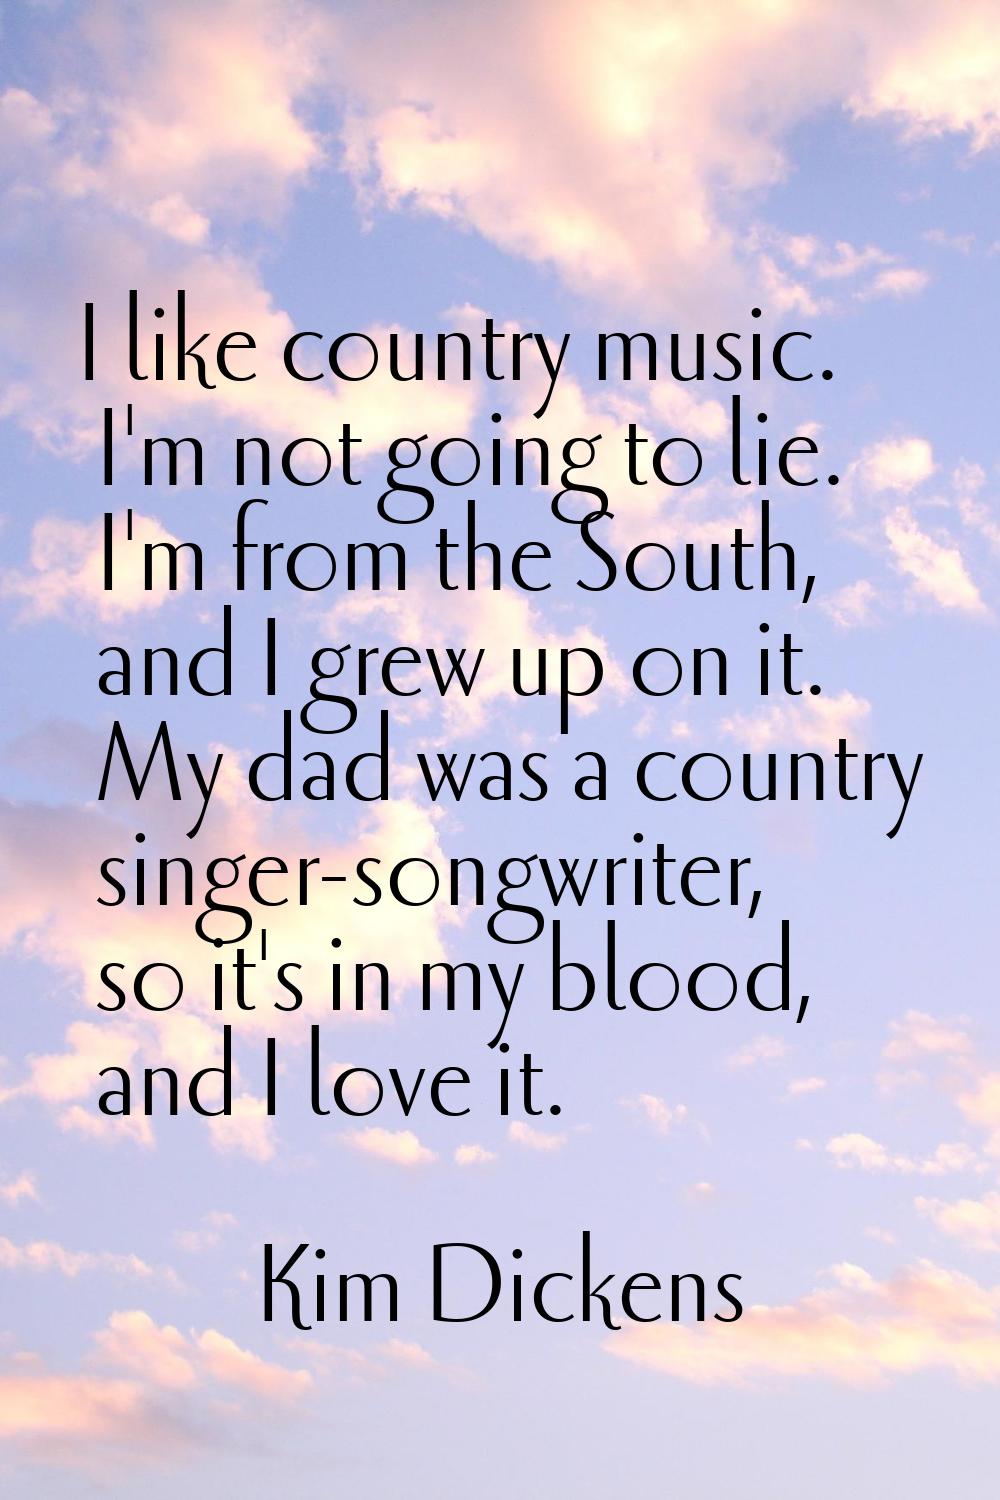 I like country music. I'm not going to lie. I'm from the South, and I grew up on it. My dad was a c